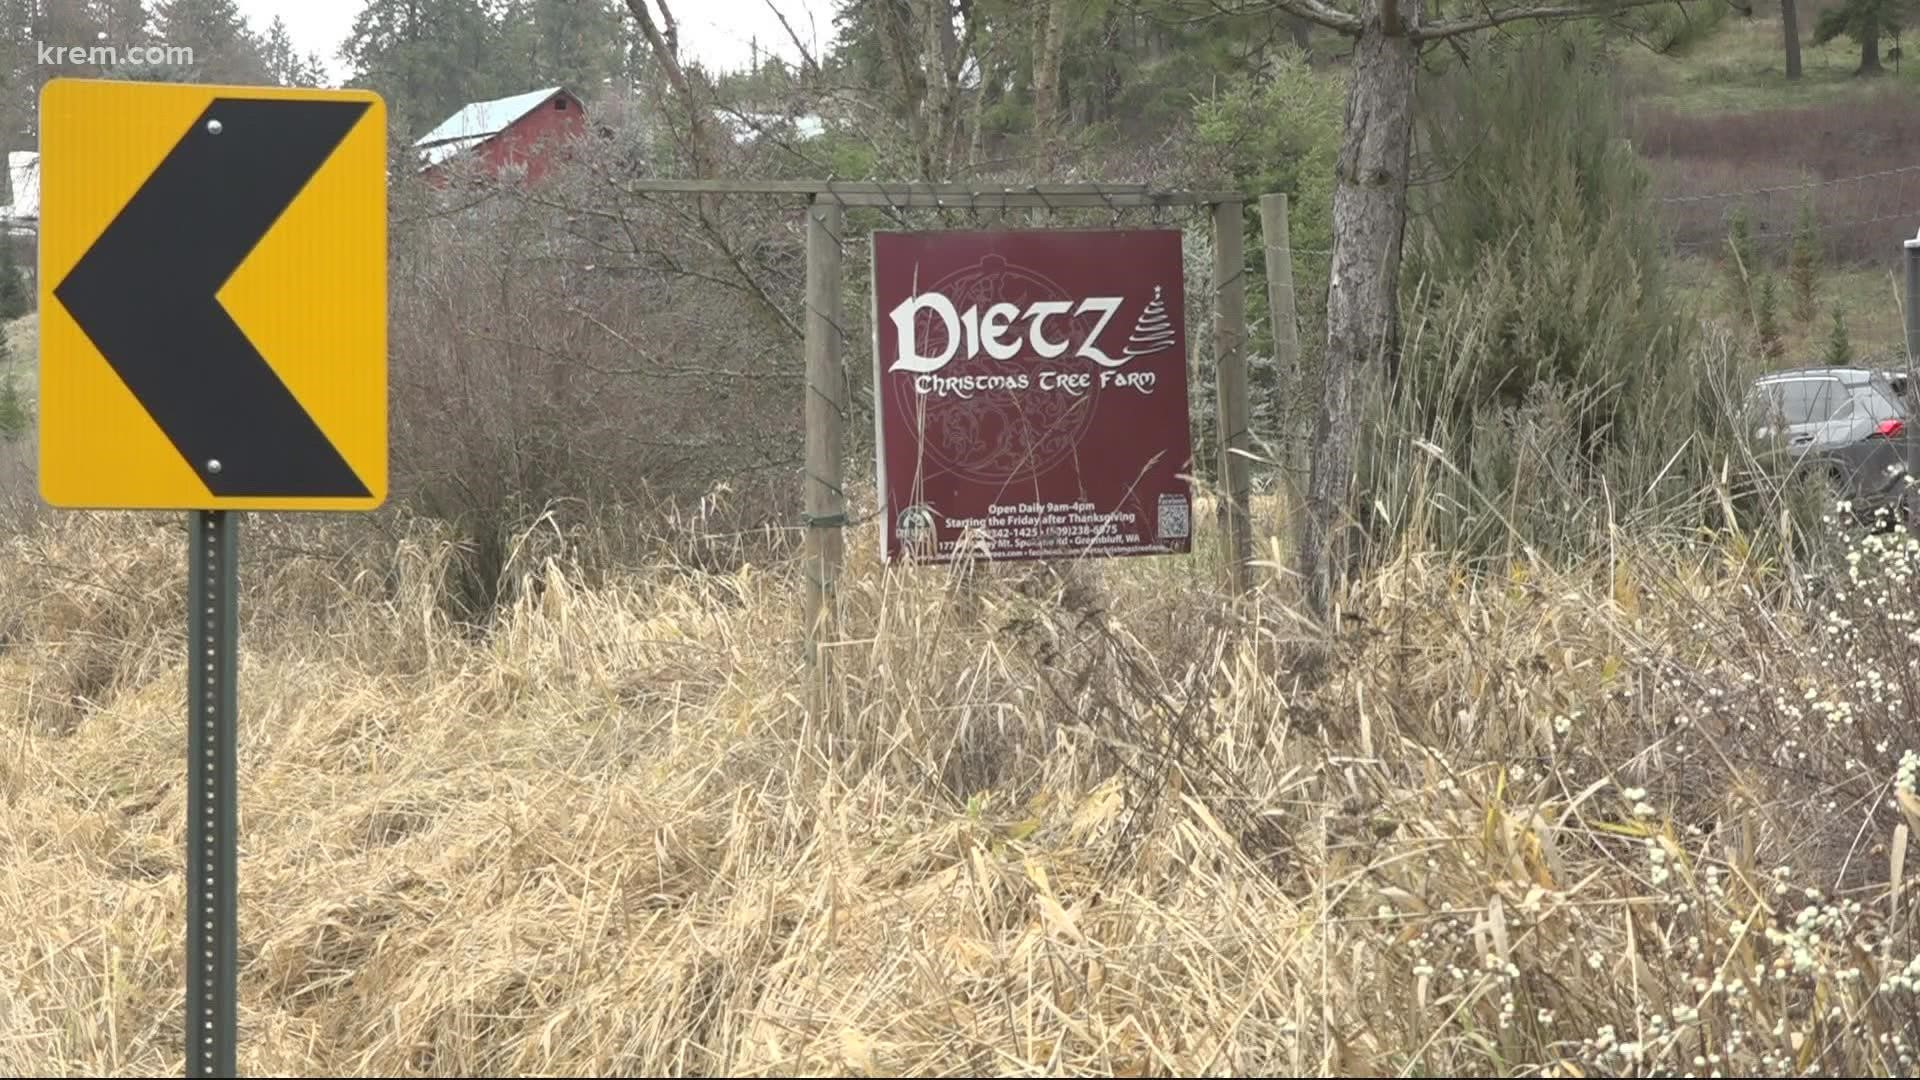 Dietz Christmas Tree Farm's supply of trees can't keep up with the demand. Dietz blames the recent drought.